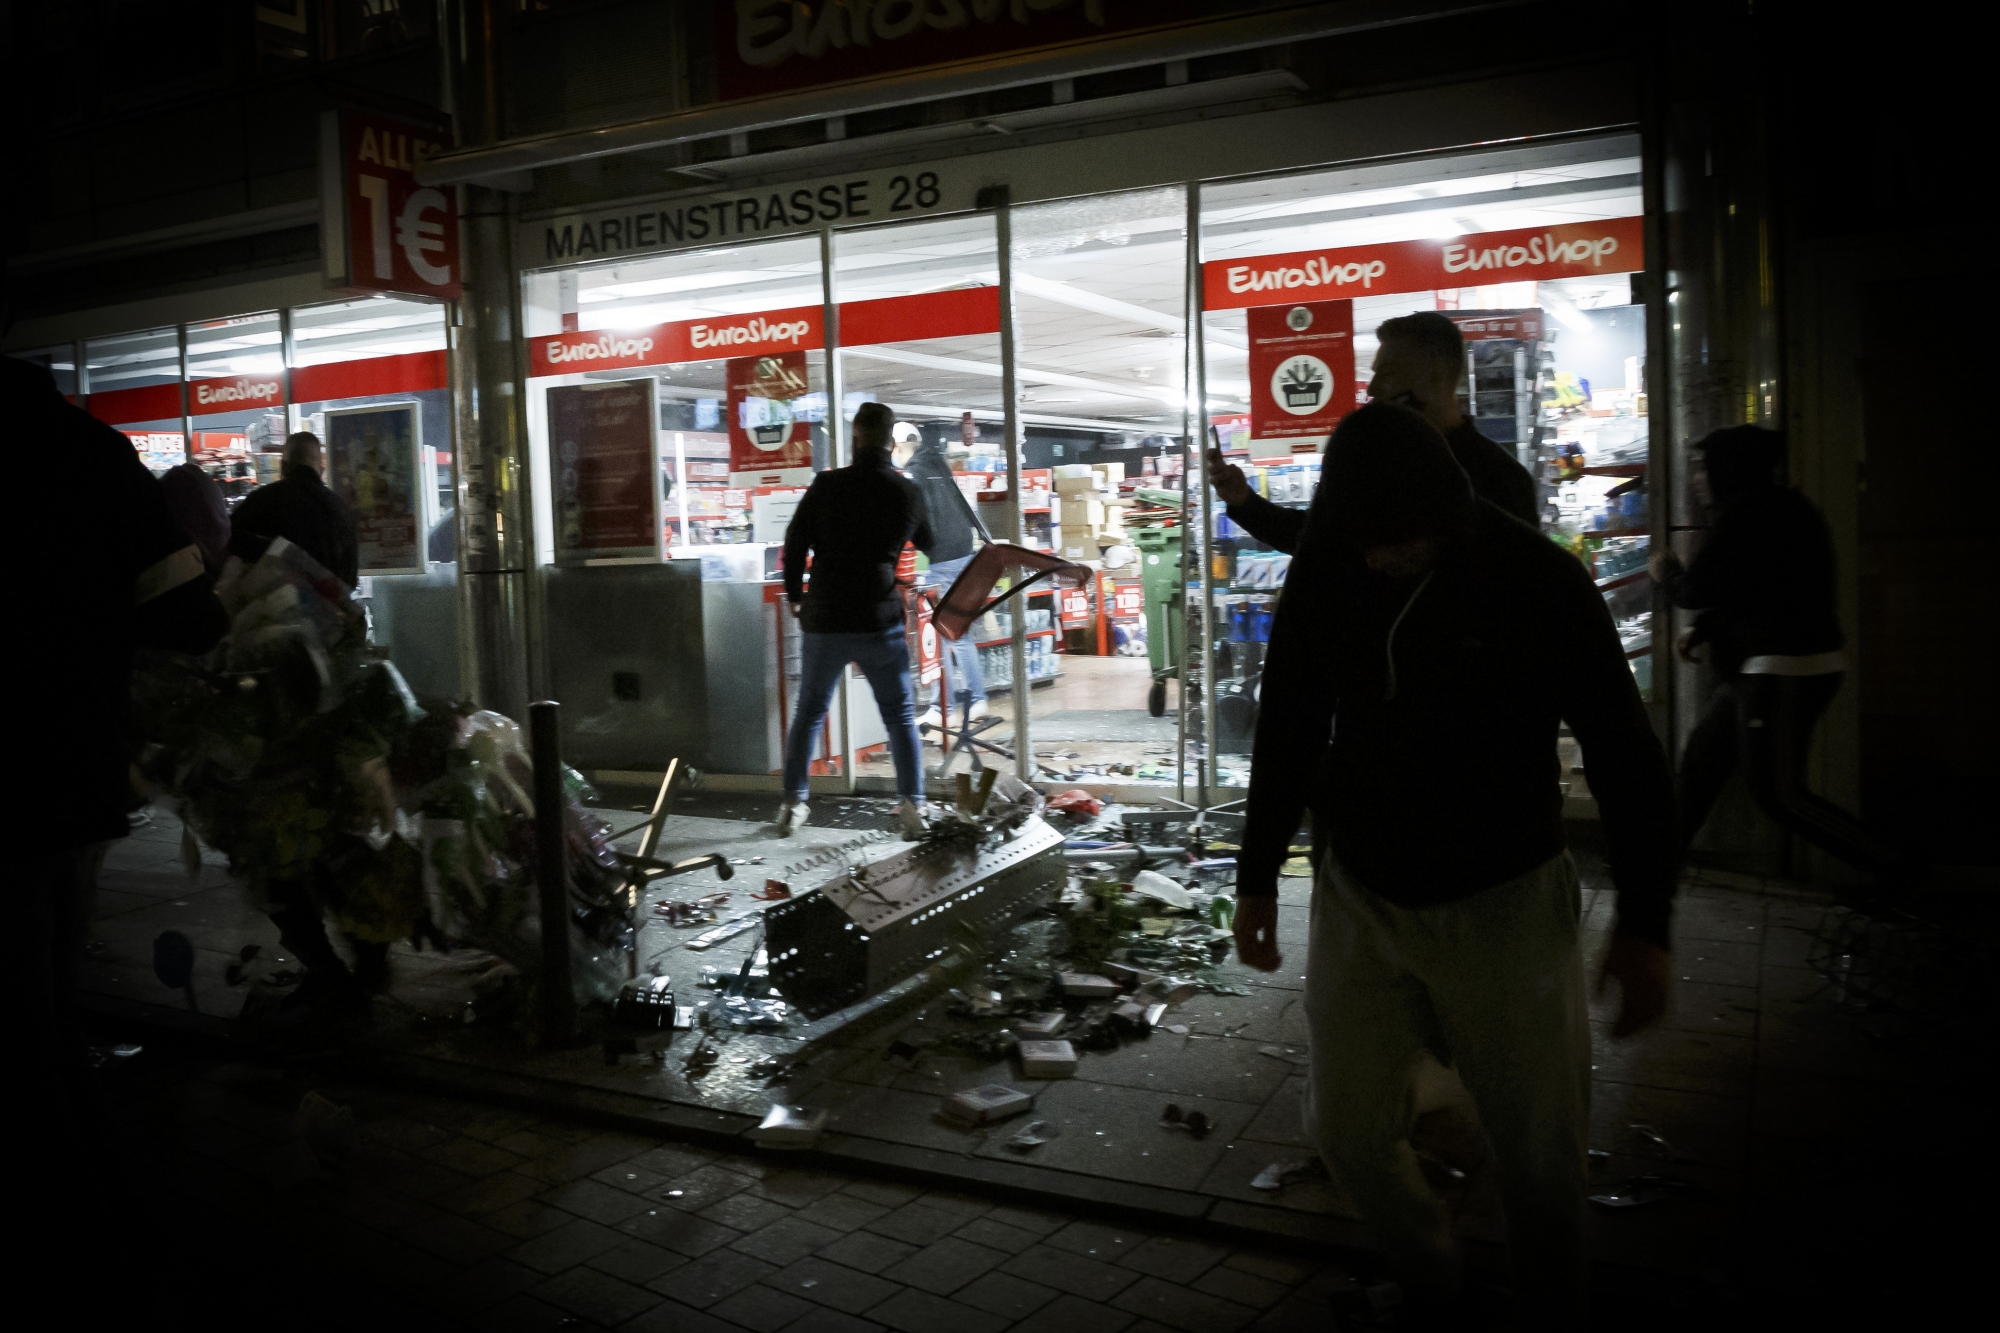 Goods lie on the floor after people broke into a shop on Marienstrasse in Stuttgart, Germany, Sunday, June 21, 2020. Dozens of violent small groups devastated downtown Stuttgart on Sunday night and injured several police officers, German news agency DPA reported. (Julian Rettig/dpa via AP)
ArcInfo